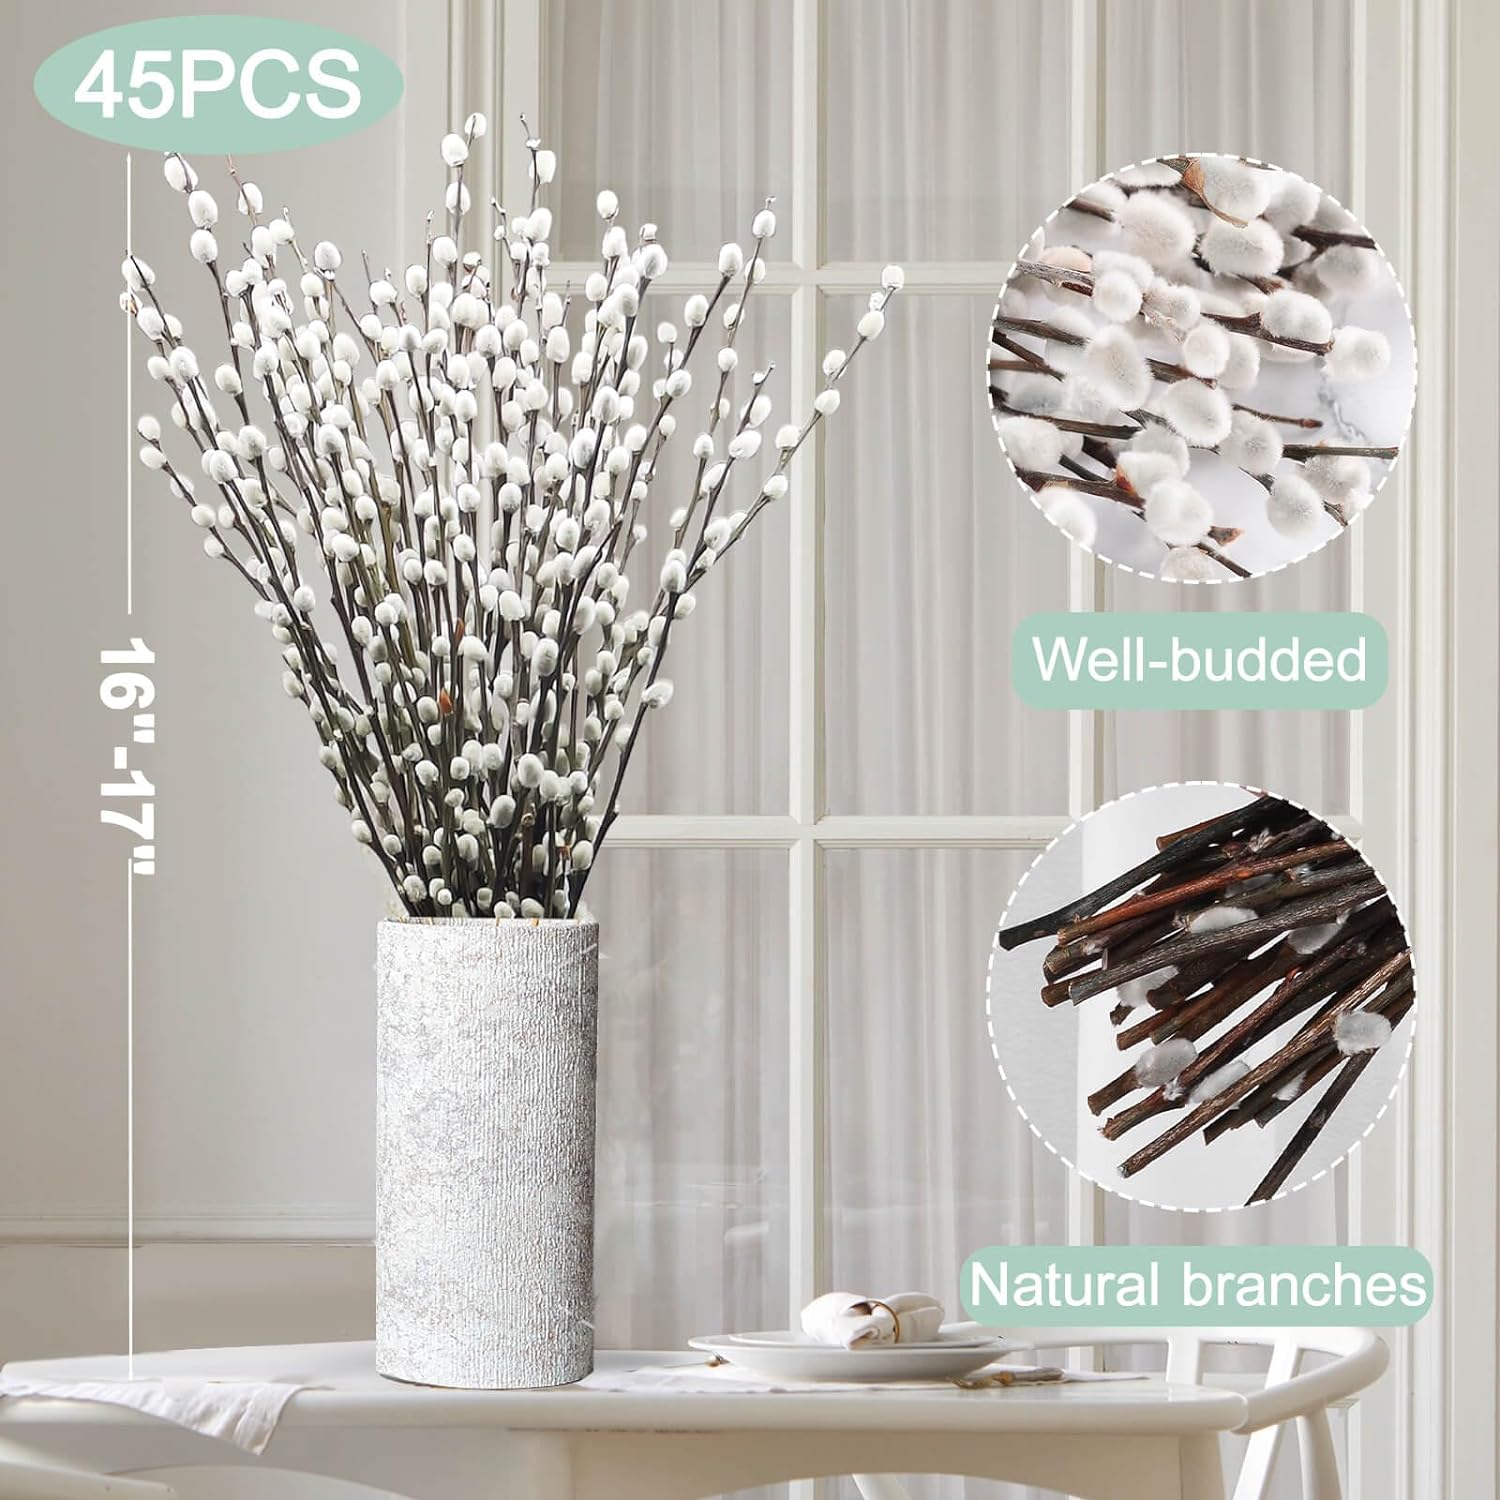 Bulk 45 Pcs Premium 17-inch Real Dried Willow Branches Natural with White Flowers Perfect for Indoor/Outdoor Events Weddings Parties Hotels Fireplaces and Yards Wholesale